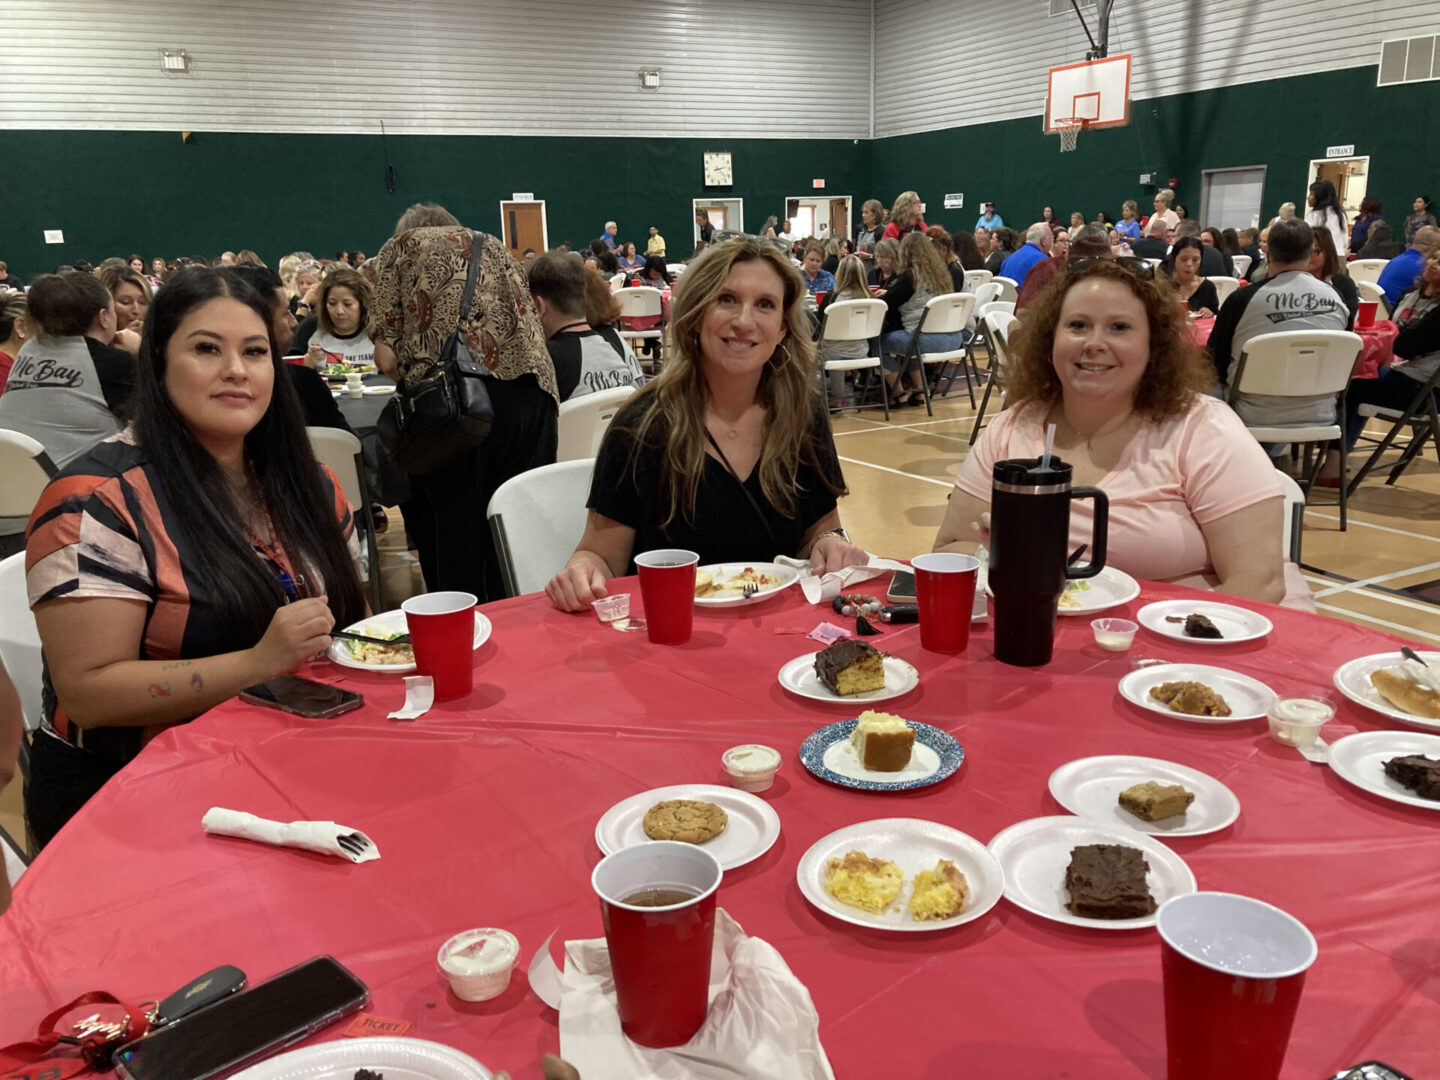 Jodie and fellow teachers enjoy lunch together at the Teachers Appreciation Celebration for the Mexia schools.